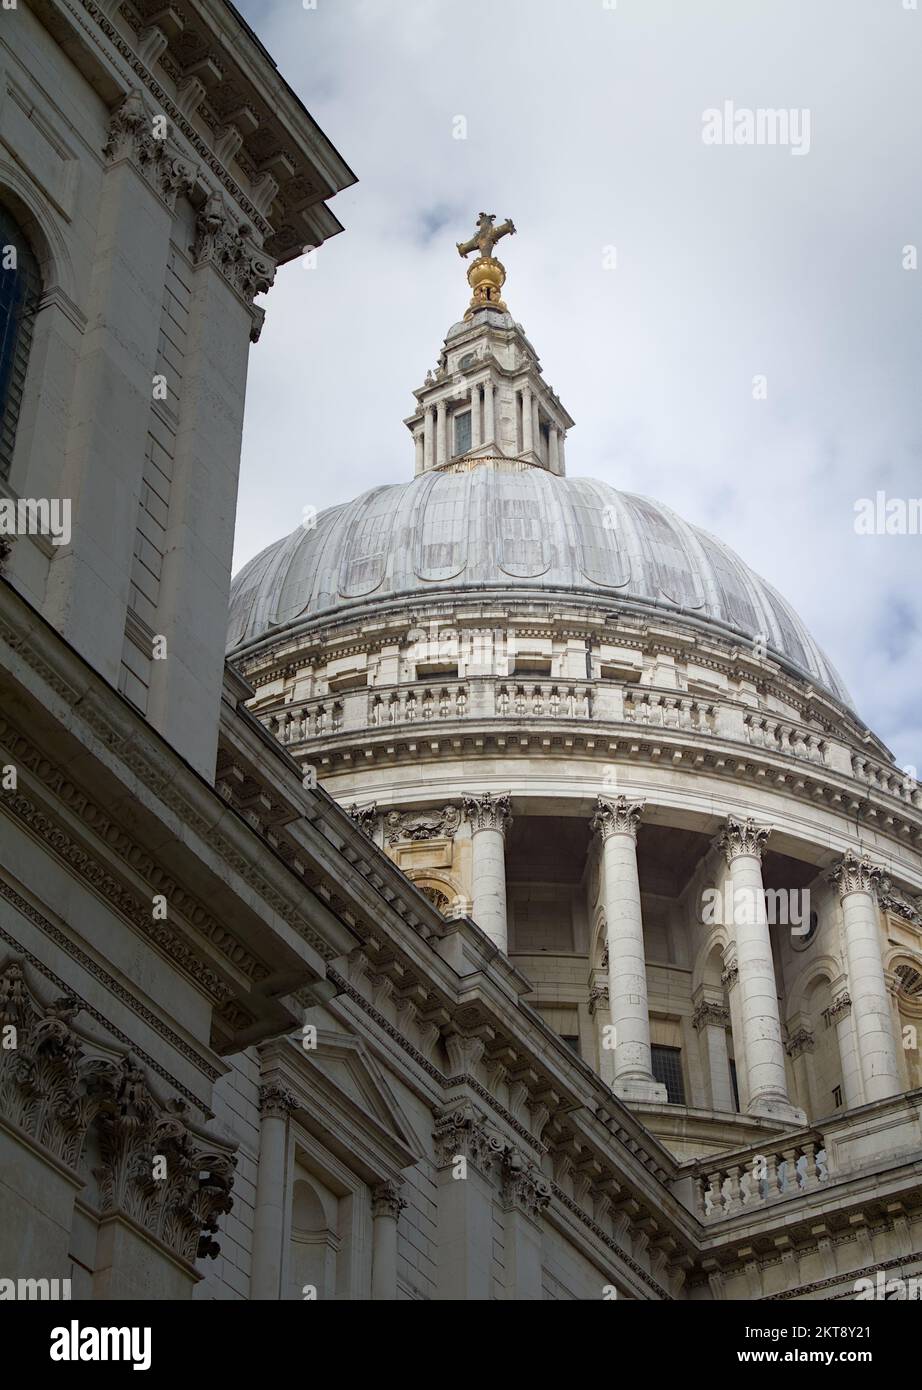 View Looking Up Of The Dome Of Saint Pauls Cathedral, London UK Stock Photo